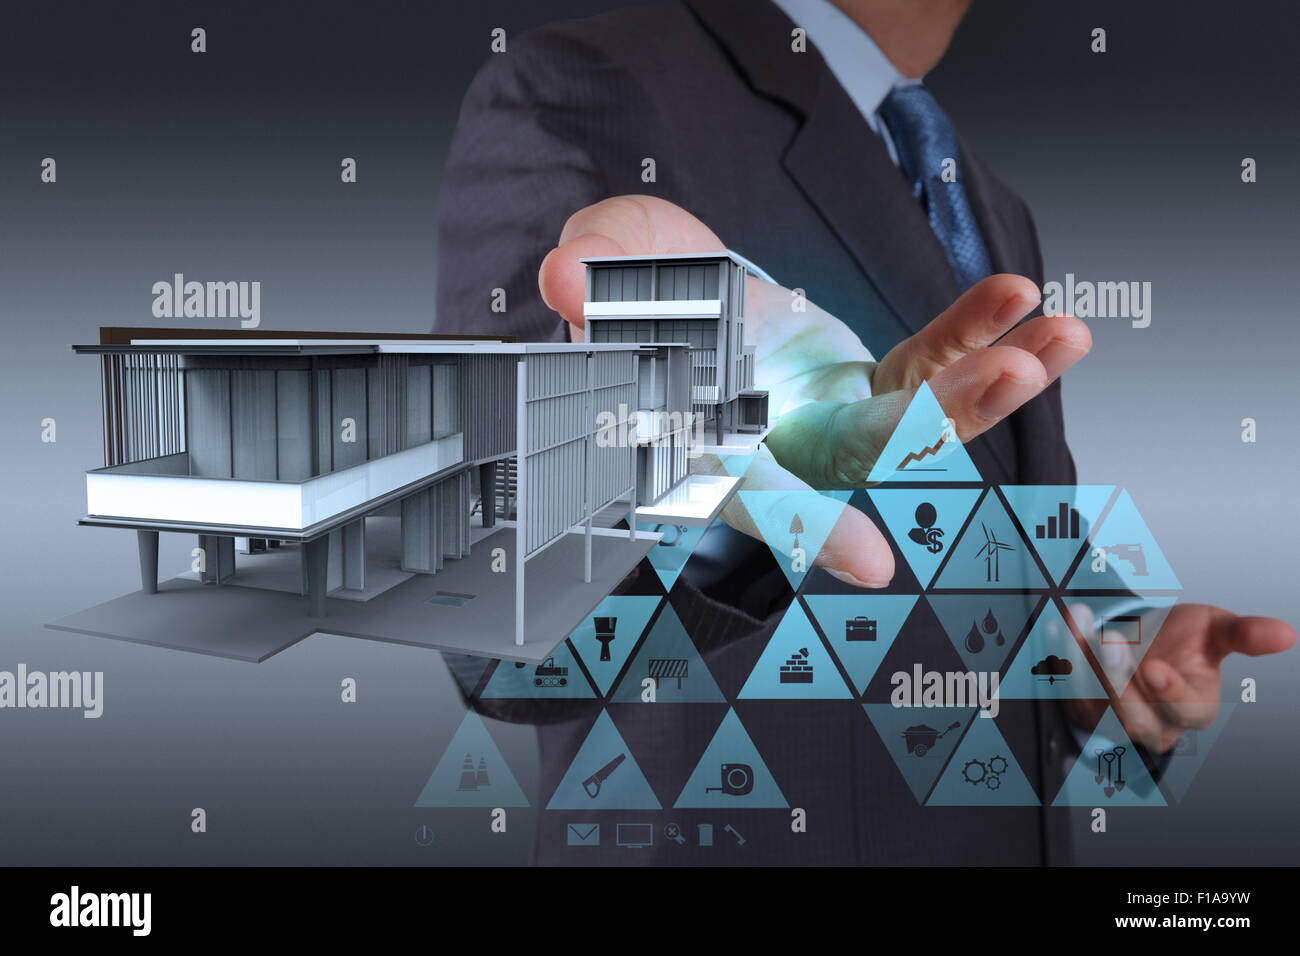 businessman hand working with new computer interface show building development concept Stock Photo